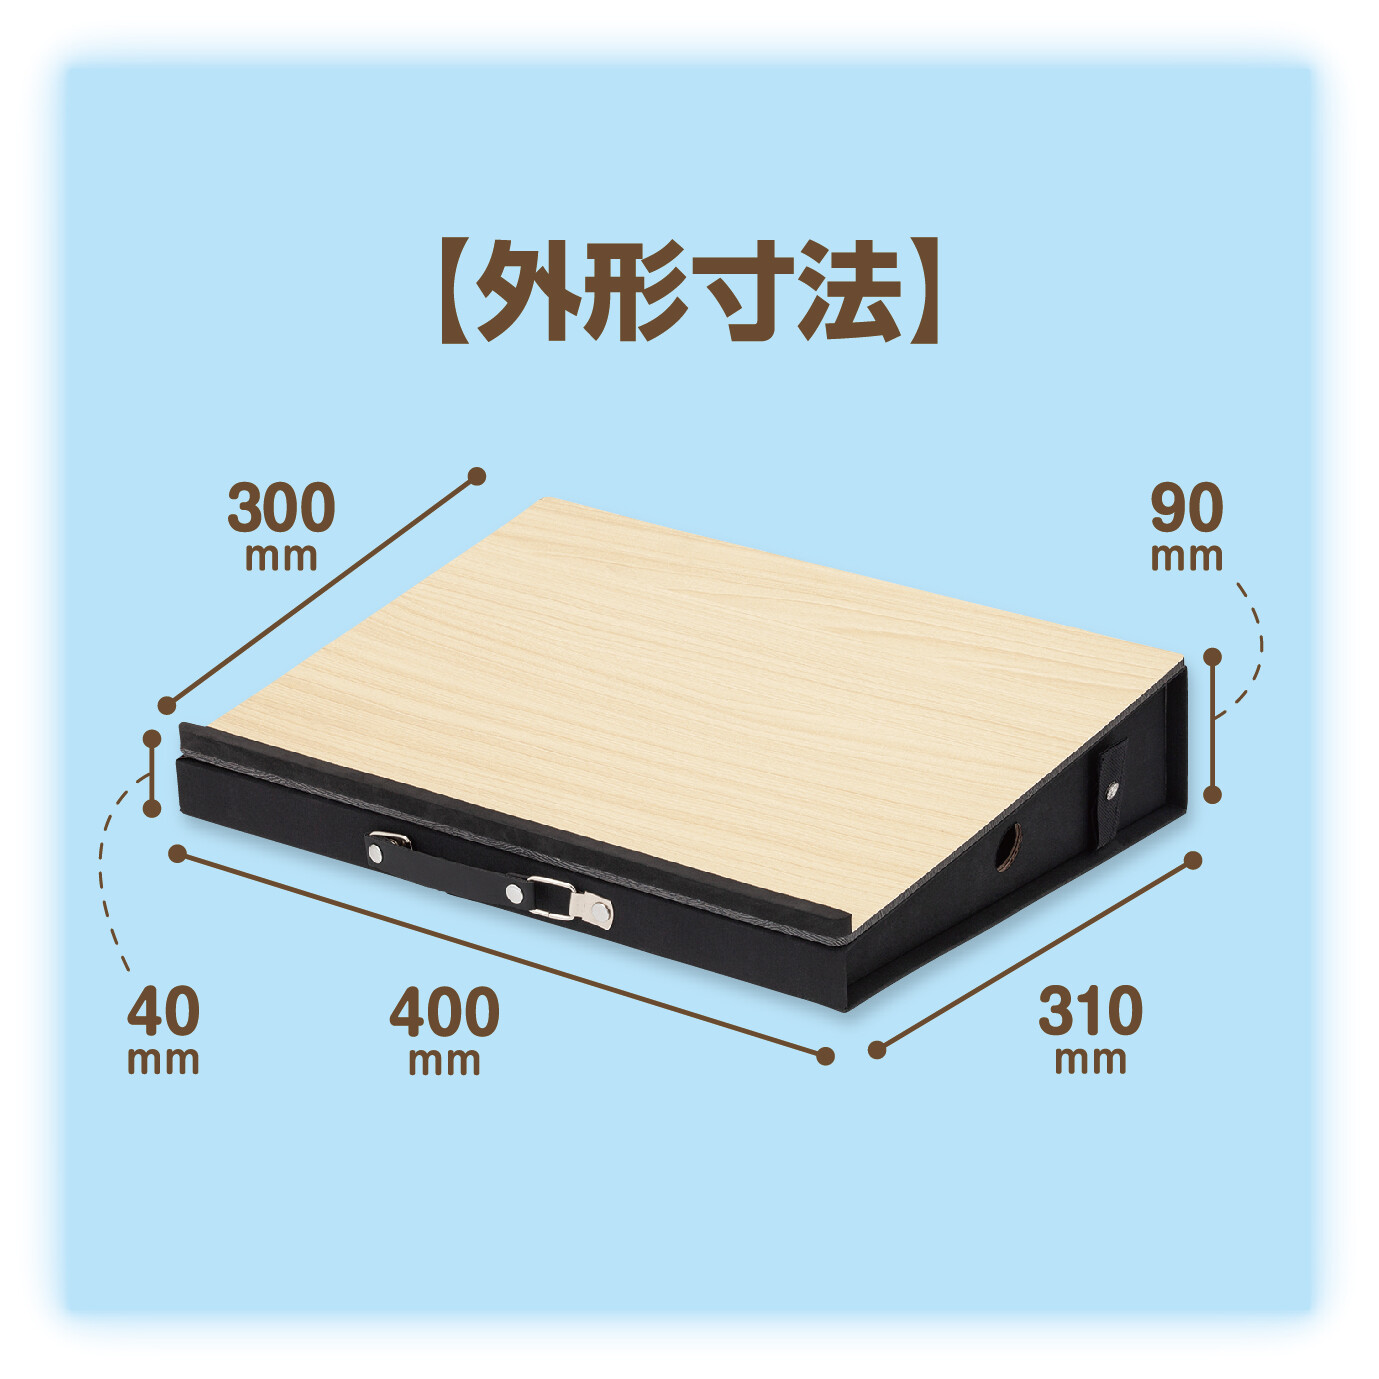 Portable Desk Export Japanese Products To The World At Wholesale